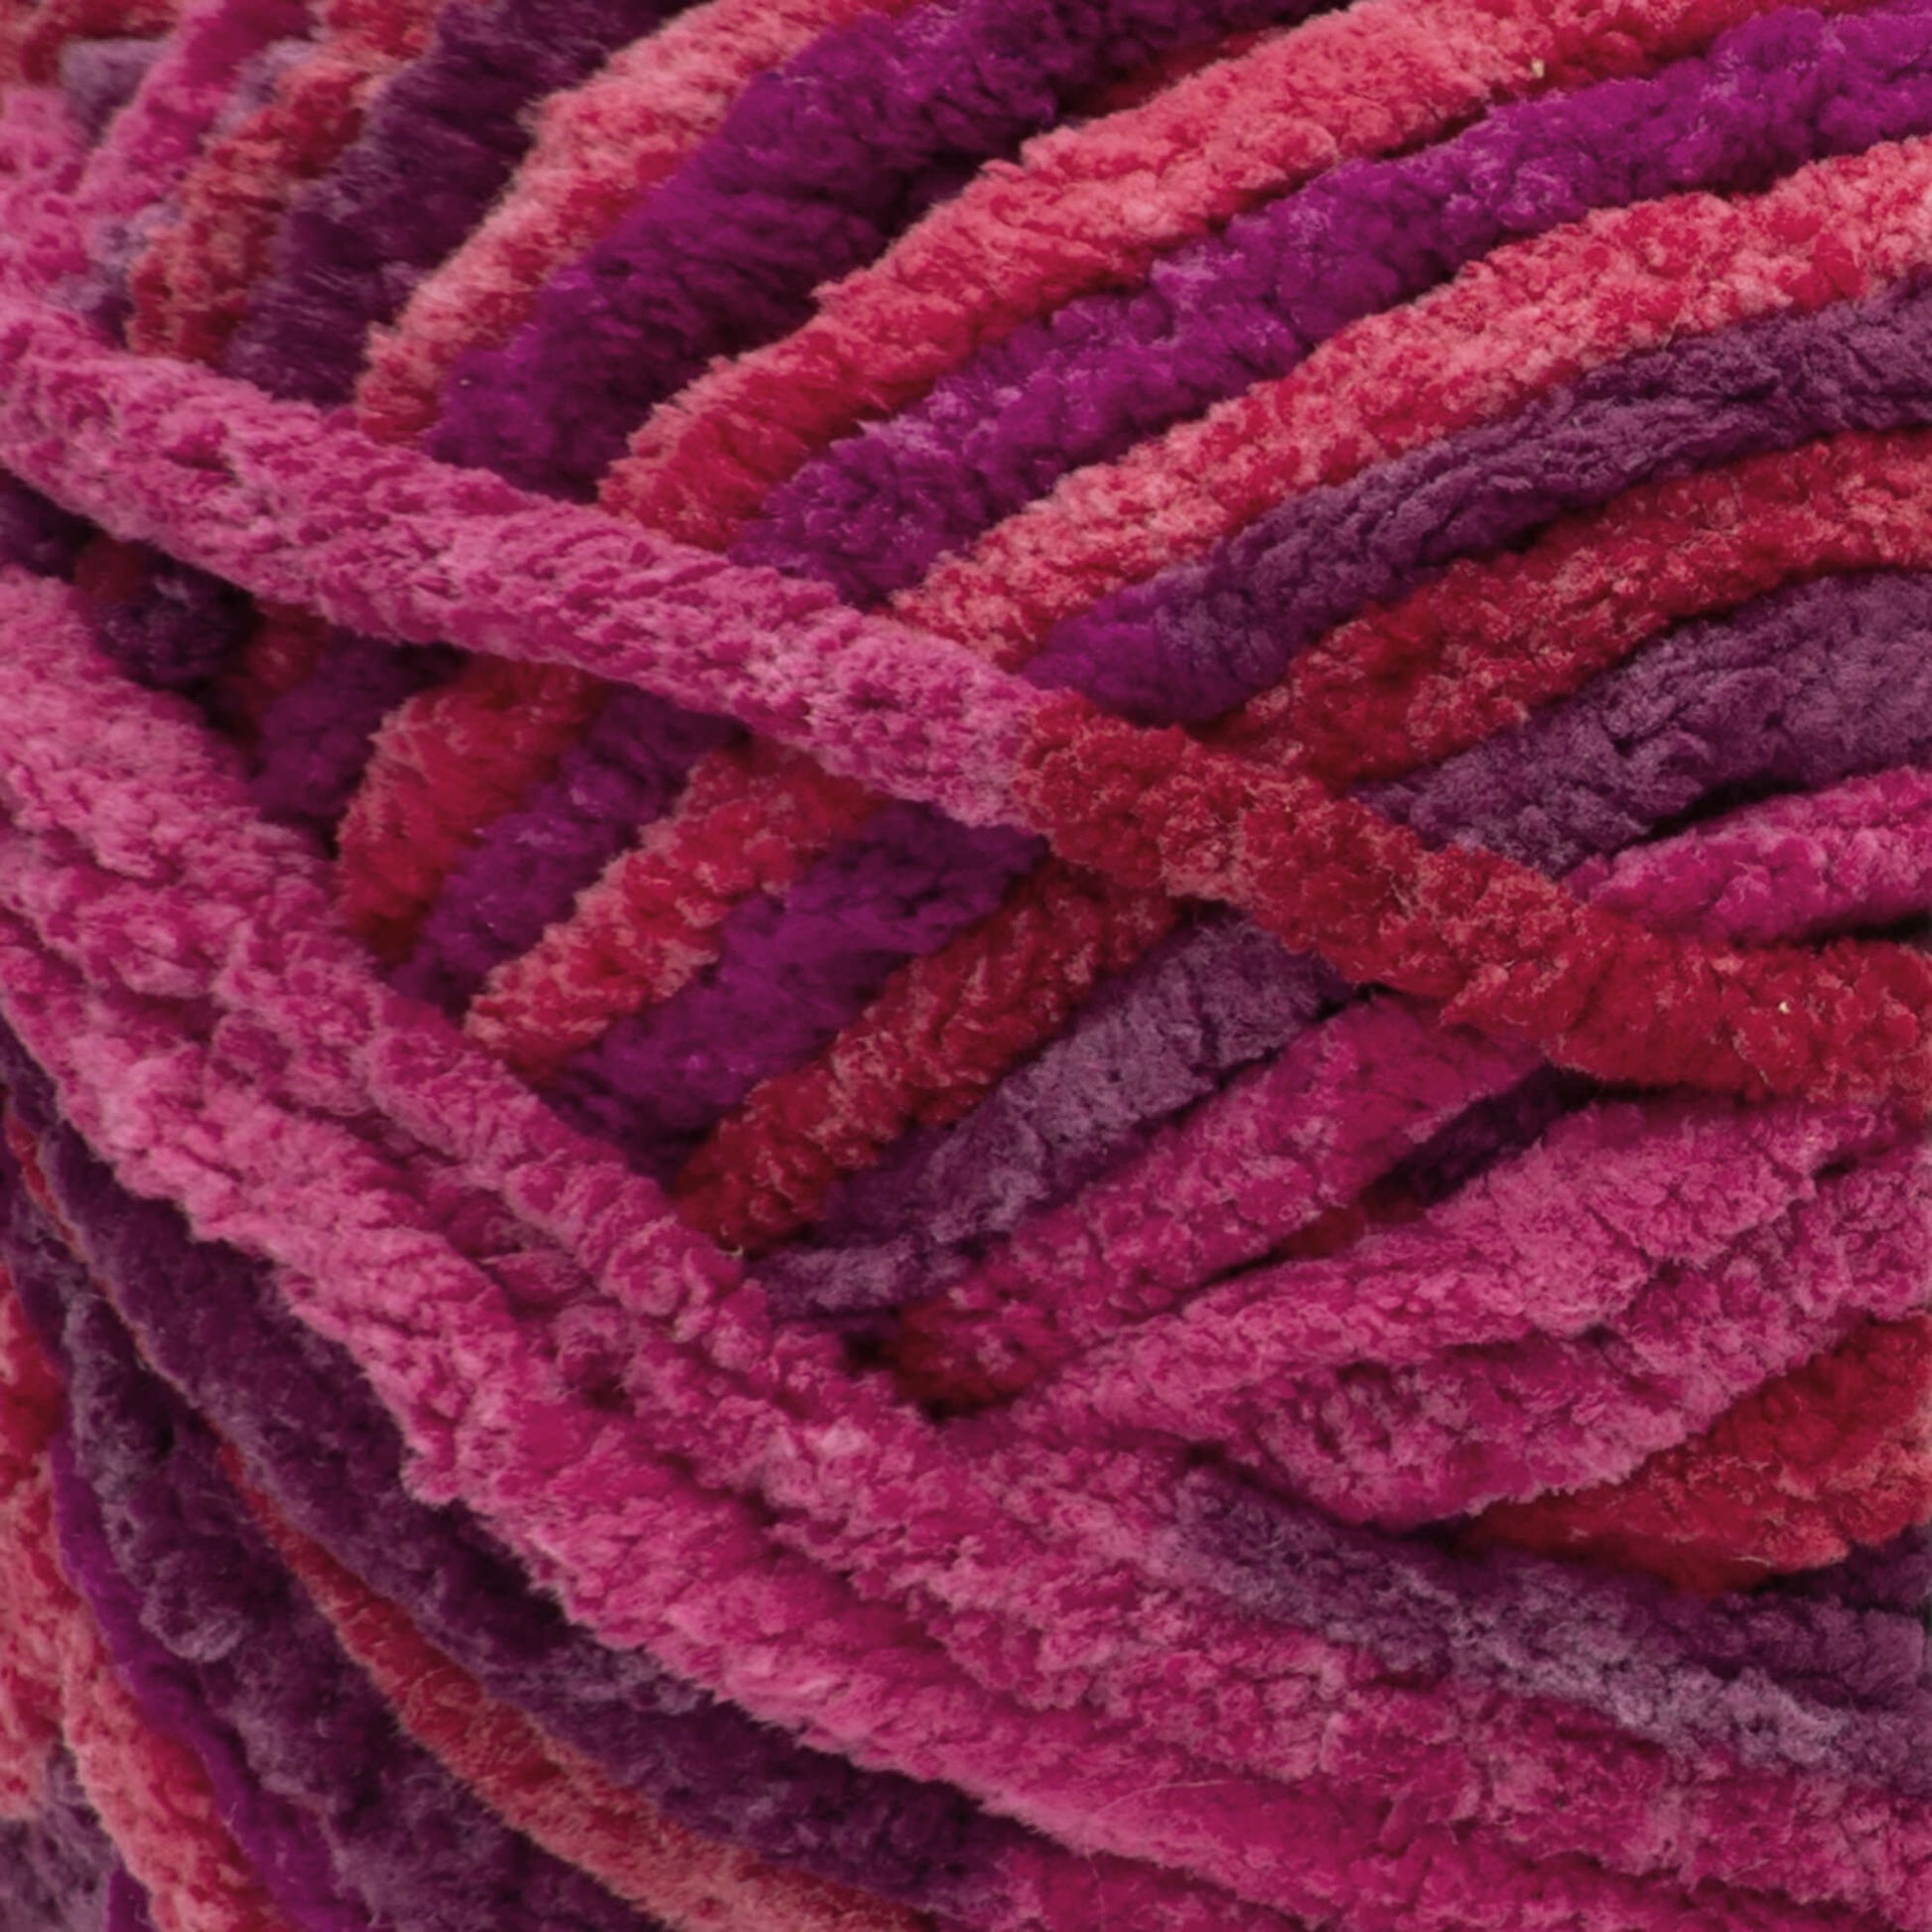 Red Heart Sweet Home Yarn - Discontinued Shades Berry Bliss